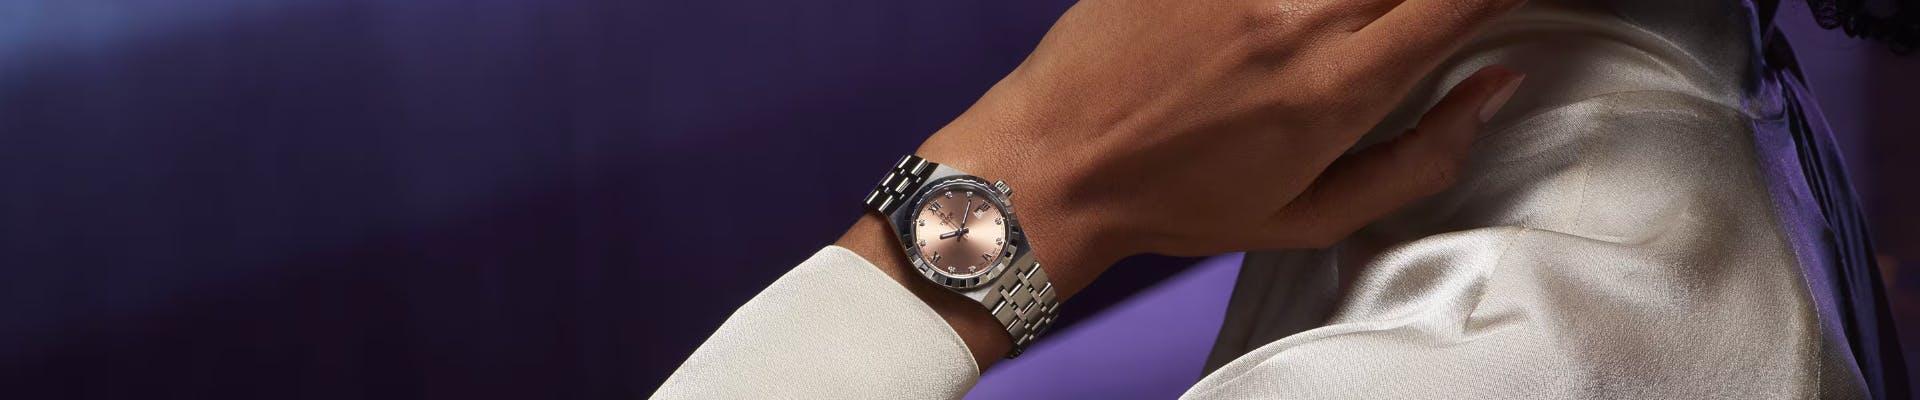 shop tudor royal watches for women at lee michaels